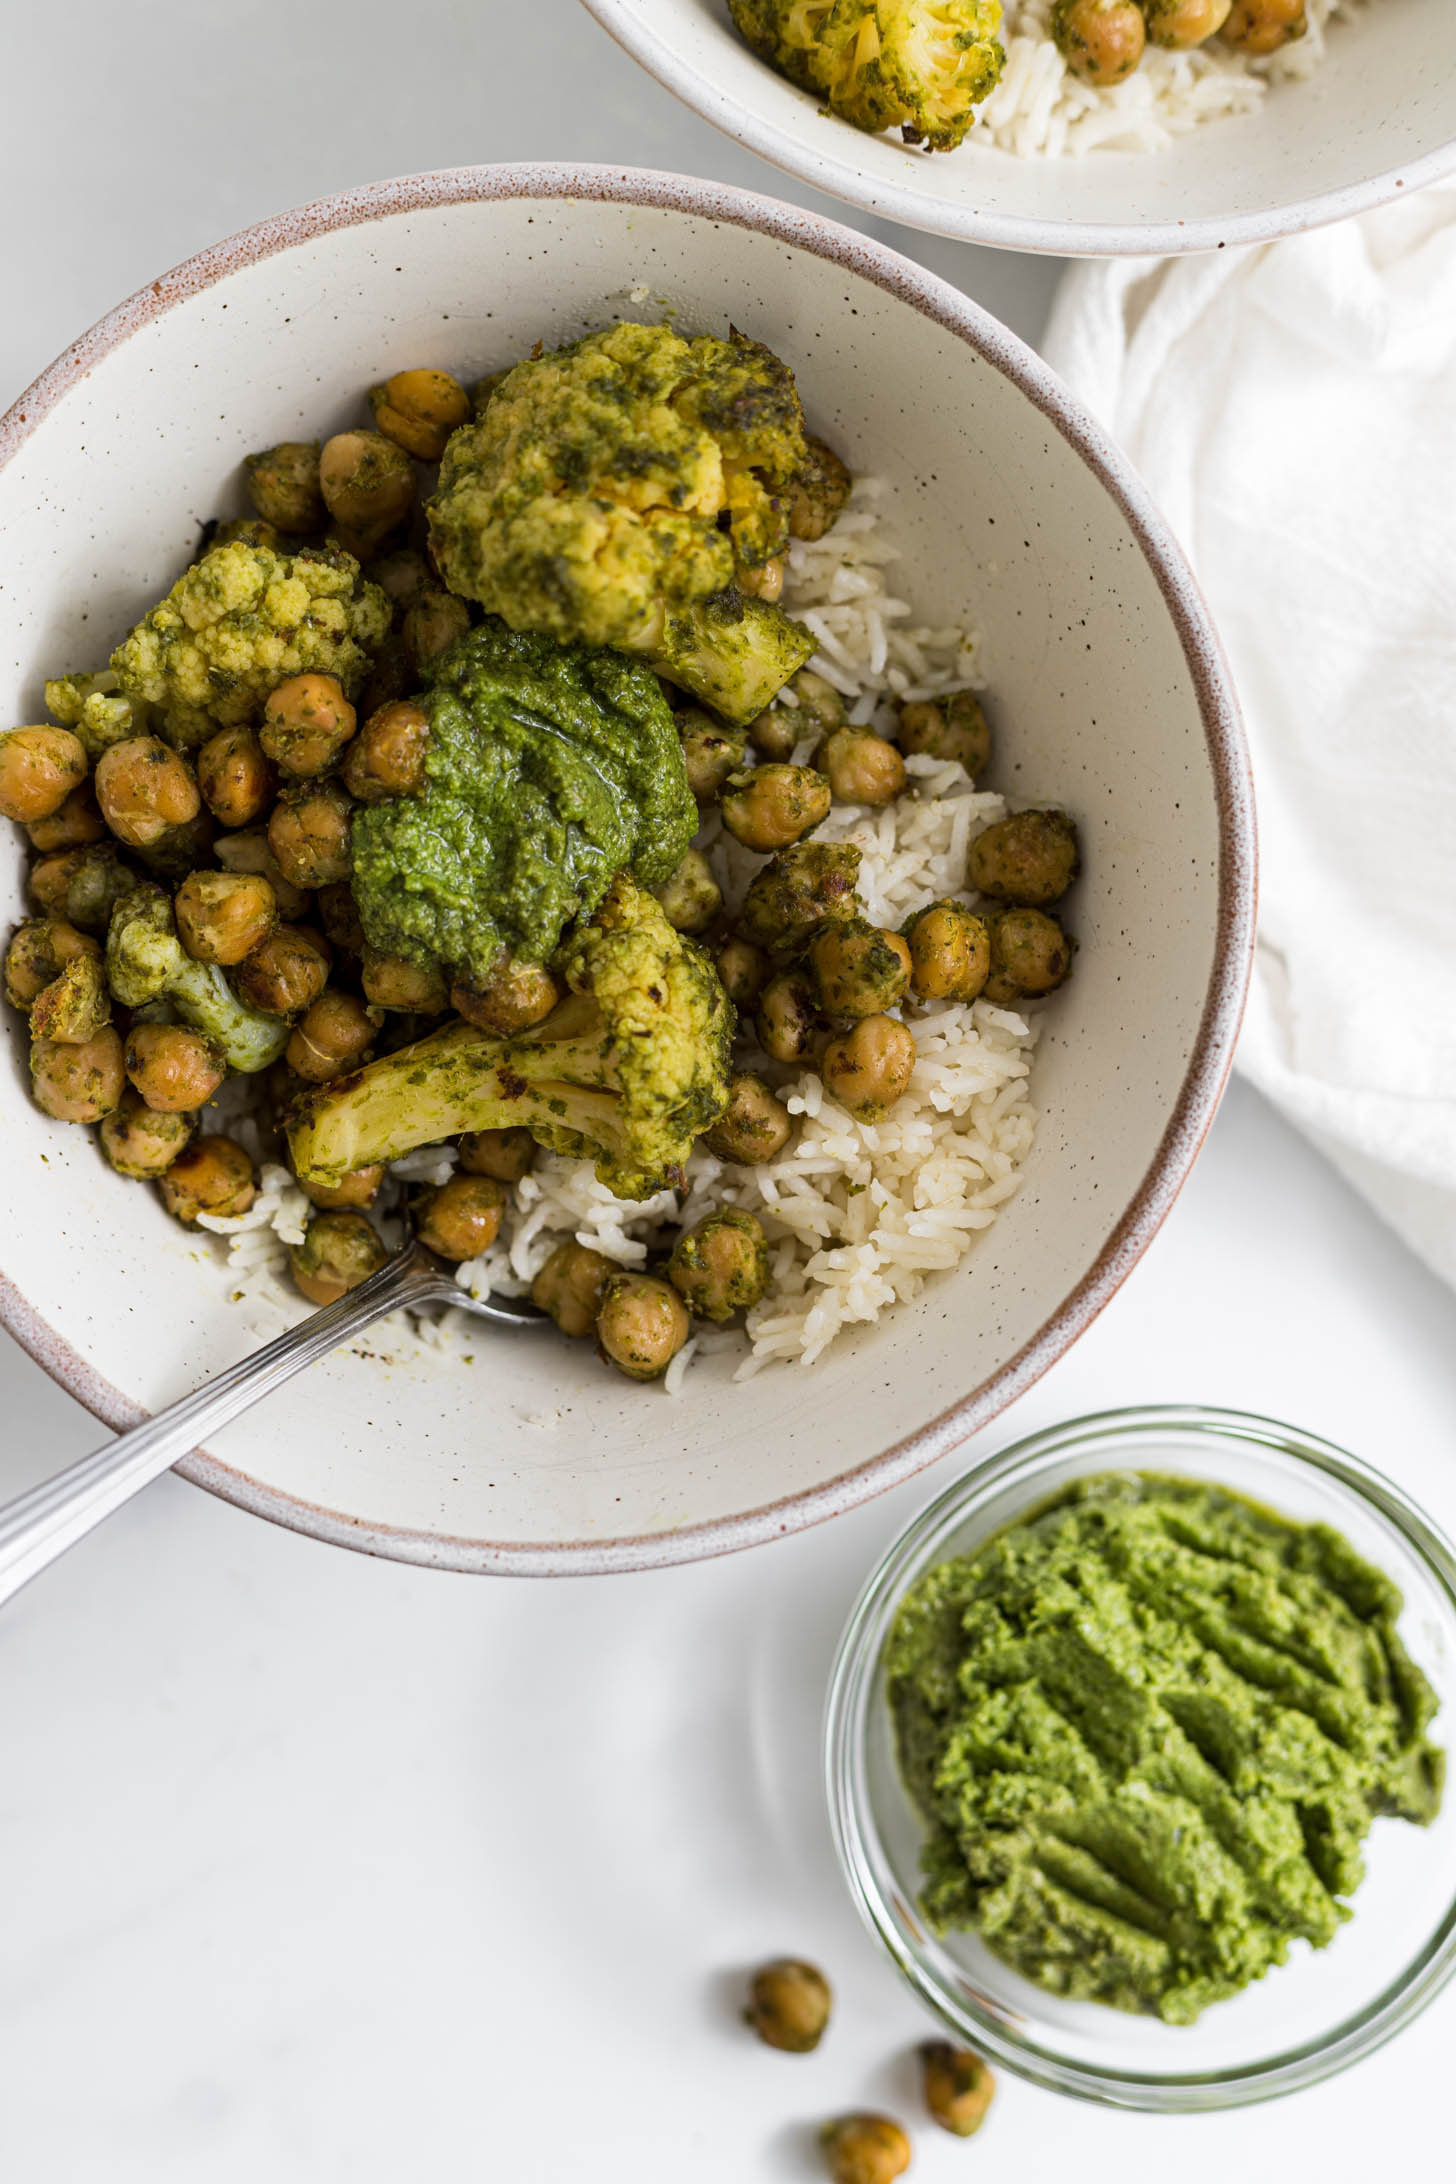 Overhead view of pesto chickpeas in a bowl with a side of pesto.